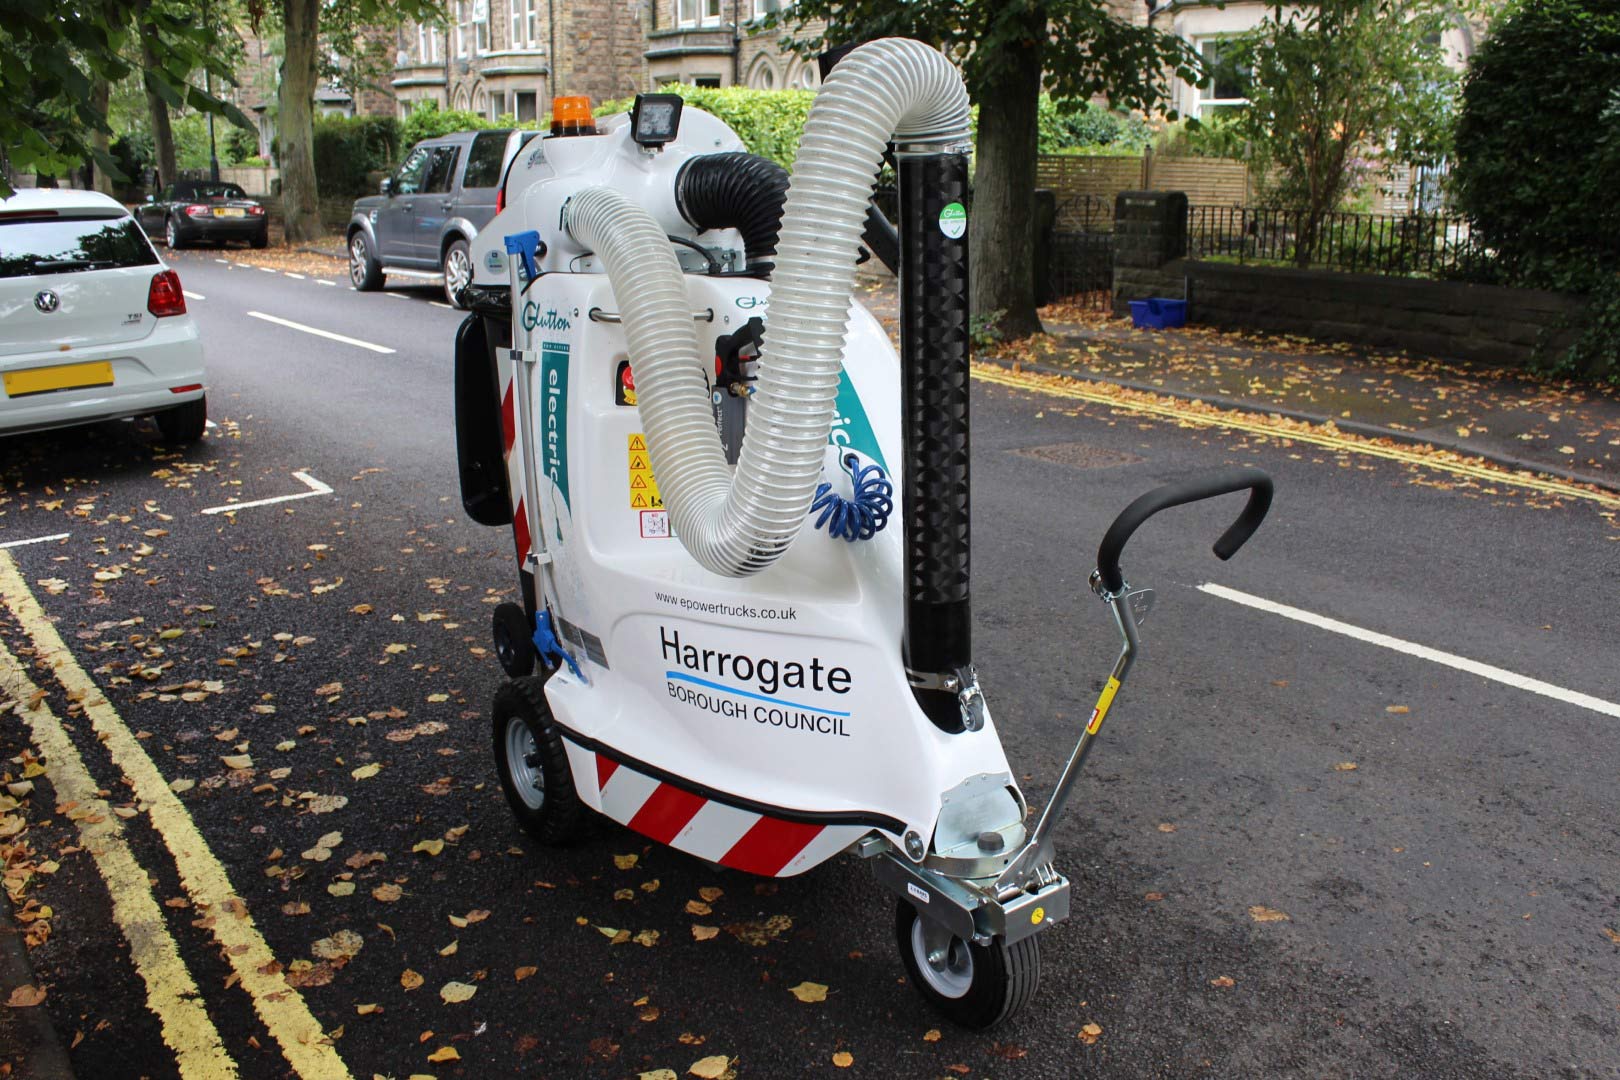 Harrogate Borough Council tackles litter with new street cleaning machine